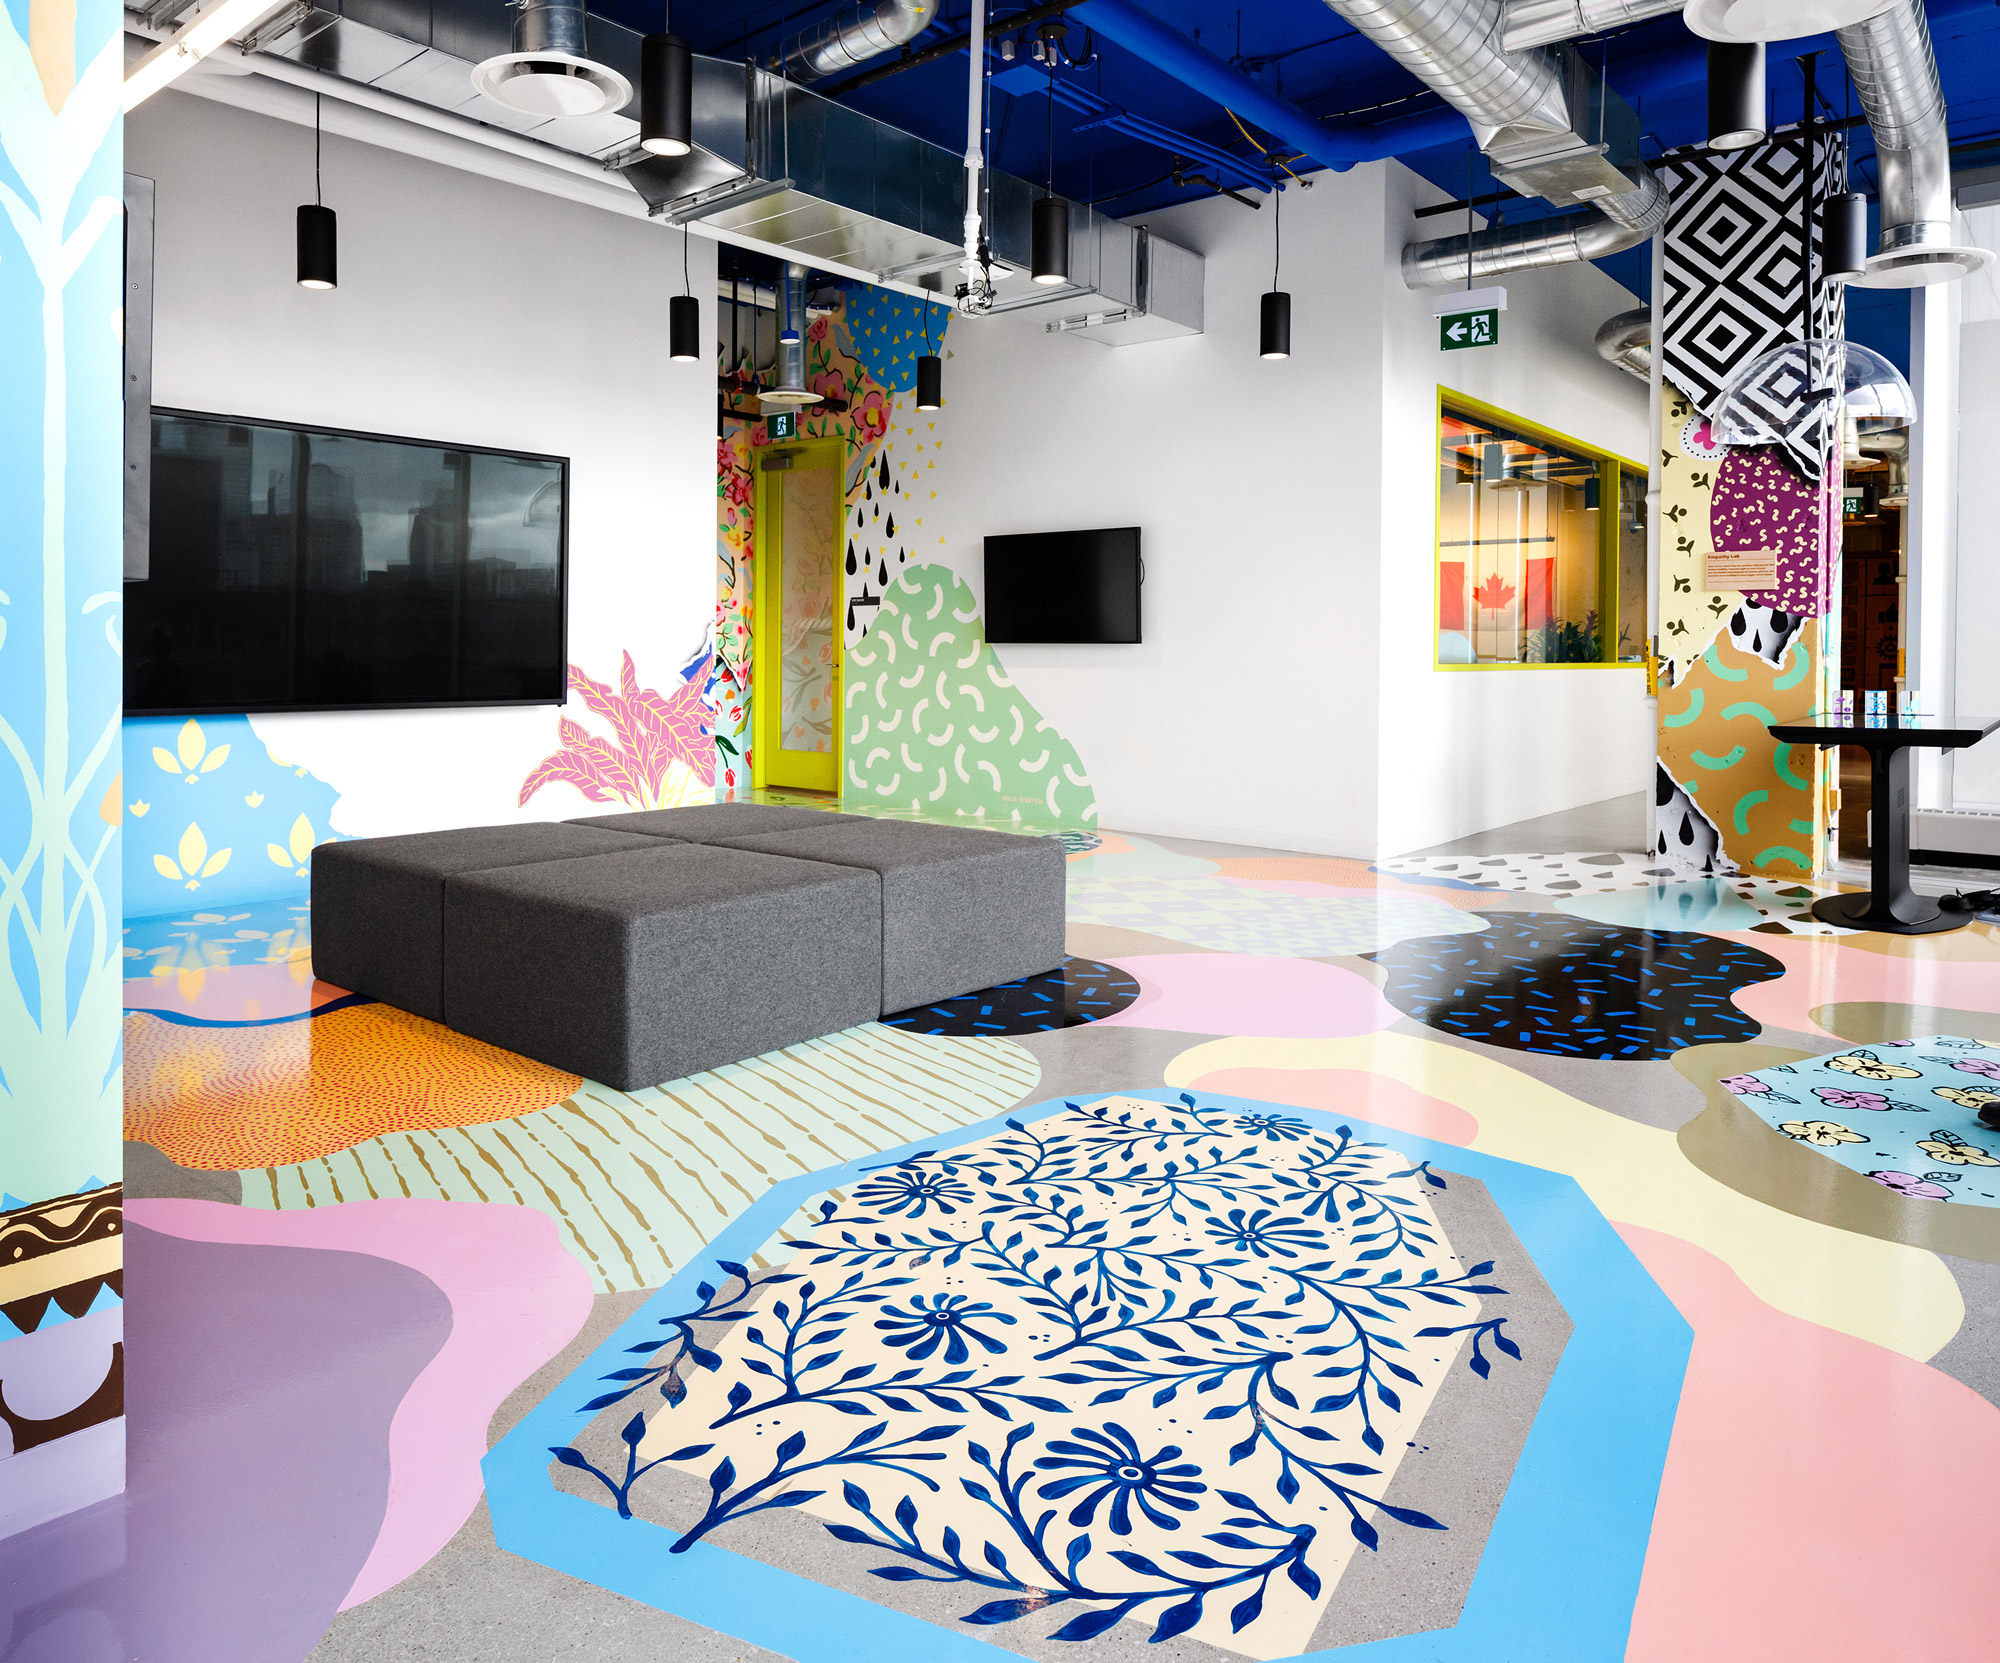 Indoor mural on walls and floor showing abstract shapes, colours and flowers